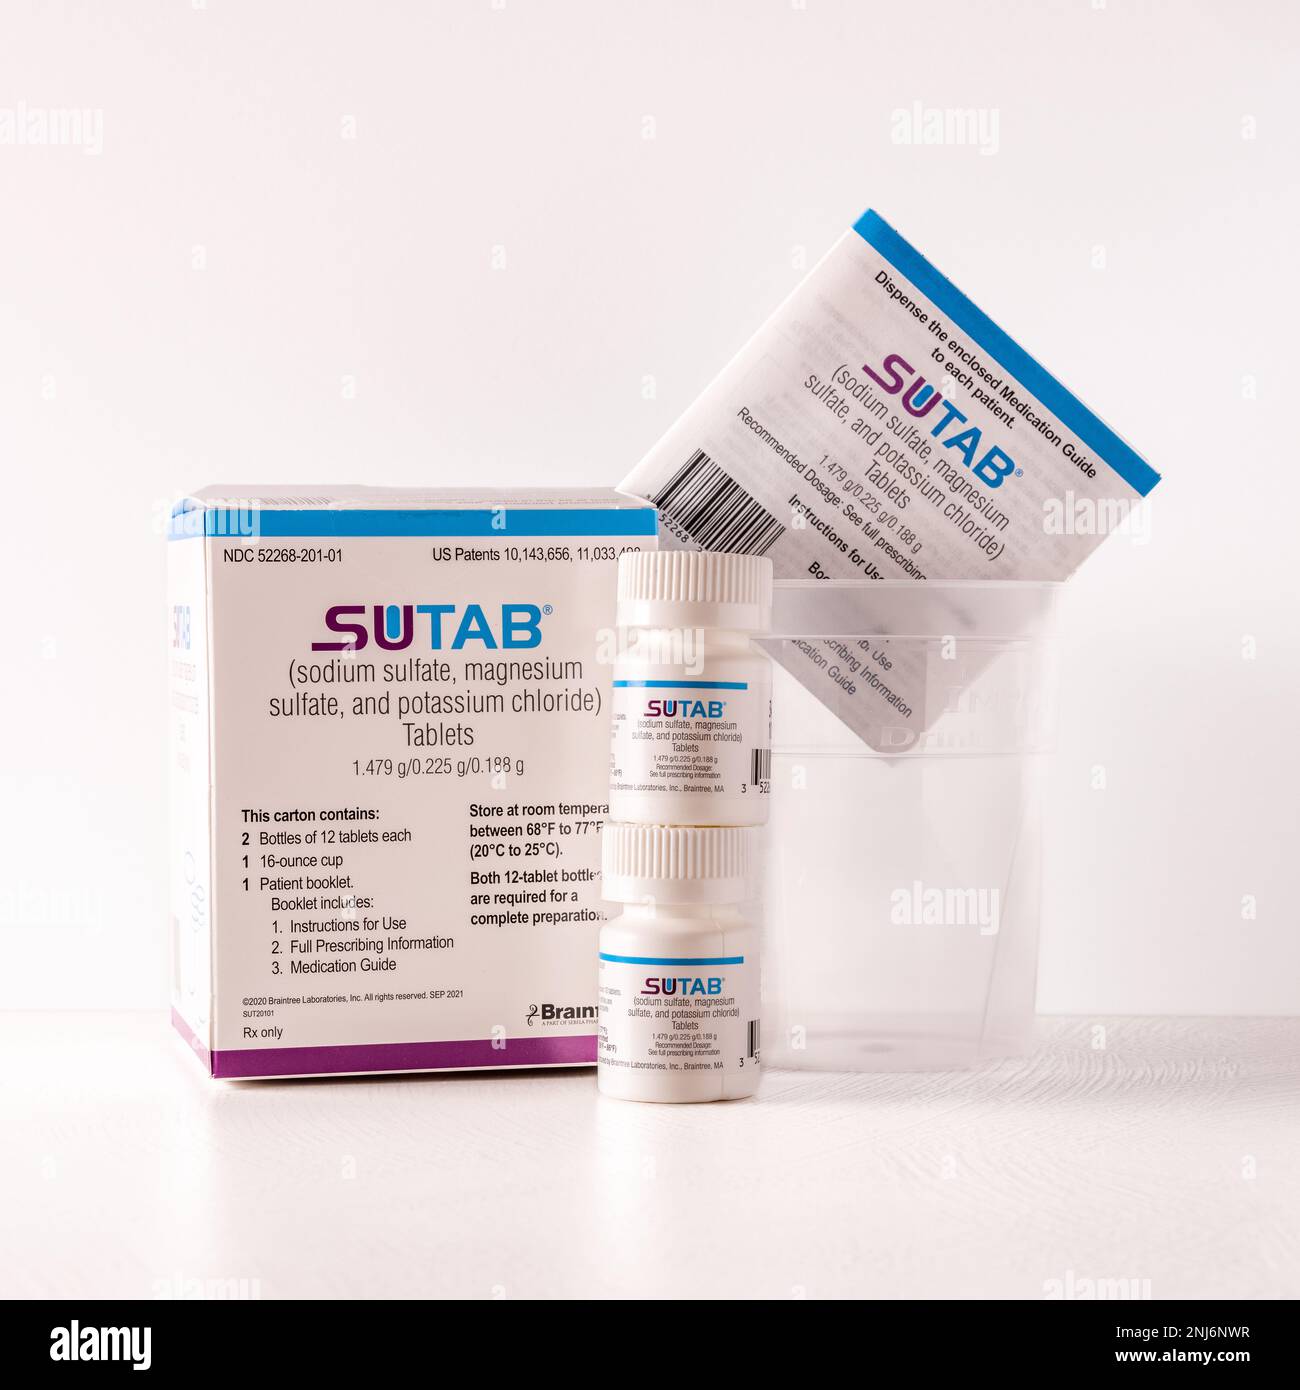 Flourtown, PA - Feb. 17, 2023: SUTAB (sodium sulfate, magnesium sulfate, and potassium chloride) is a tablet based kit to cleanse the colon in prepara Stock Photo